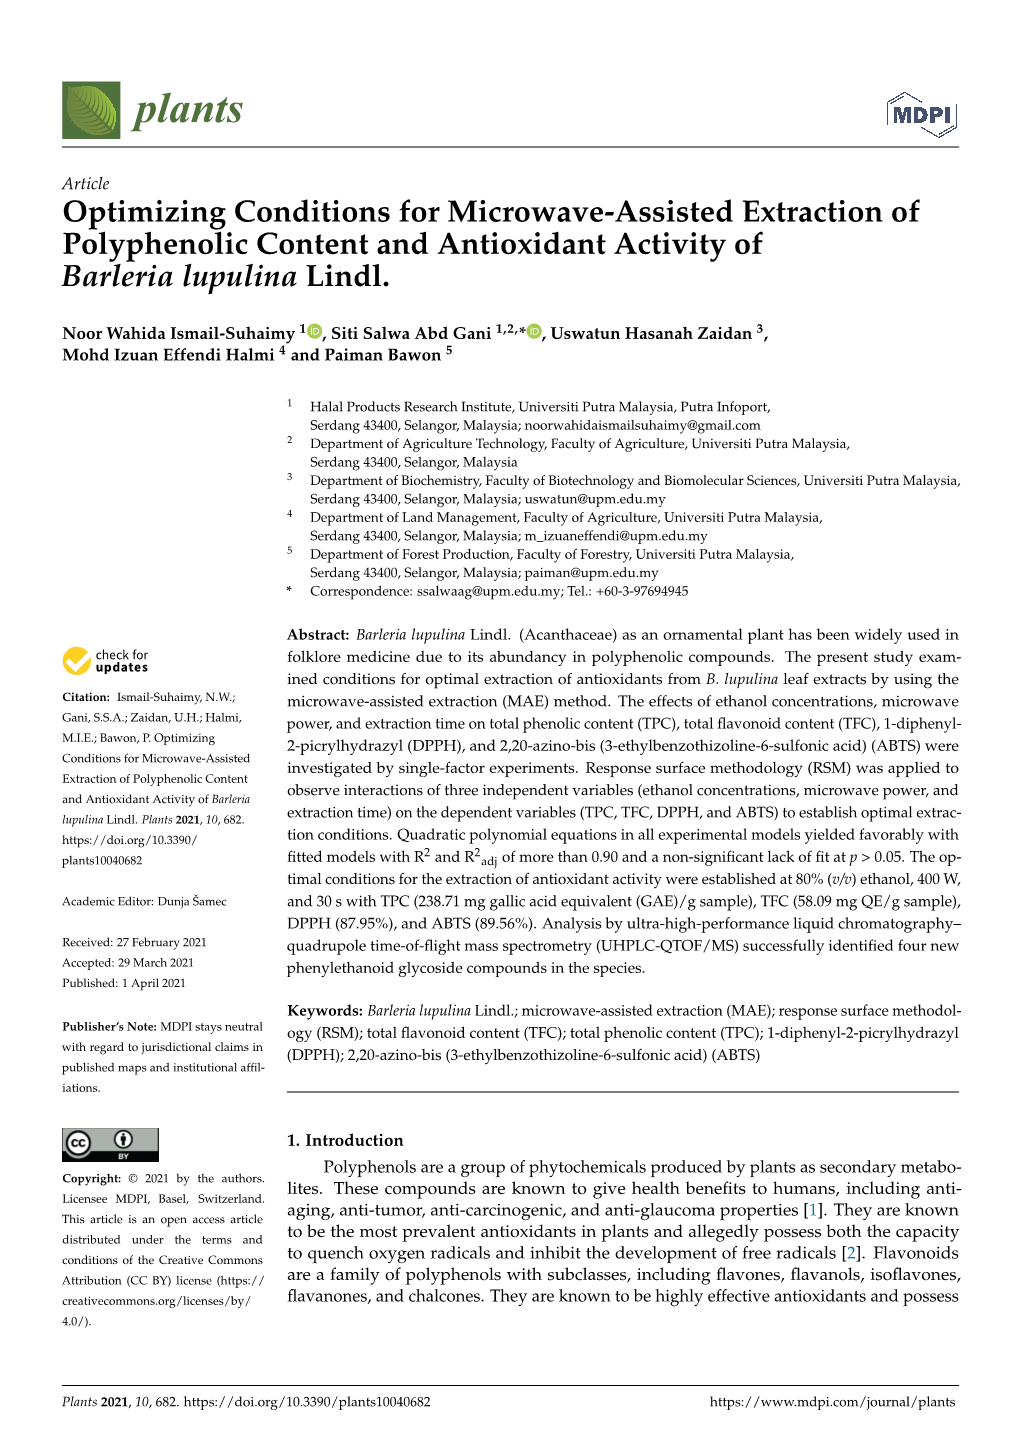 Optimizing Conditions for Microwave-Assisted Extraction of Polyphenolic Content and Antioxidant Activity of Barleria Lupulina Lindl